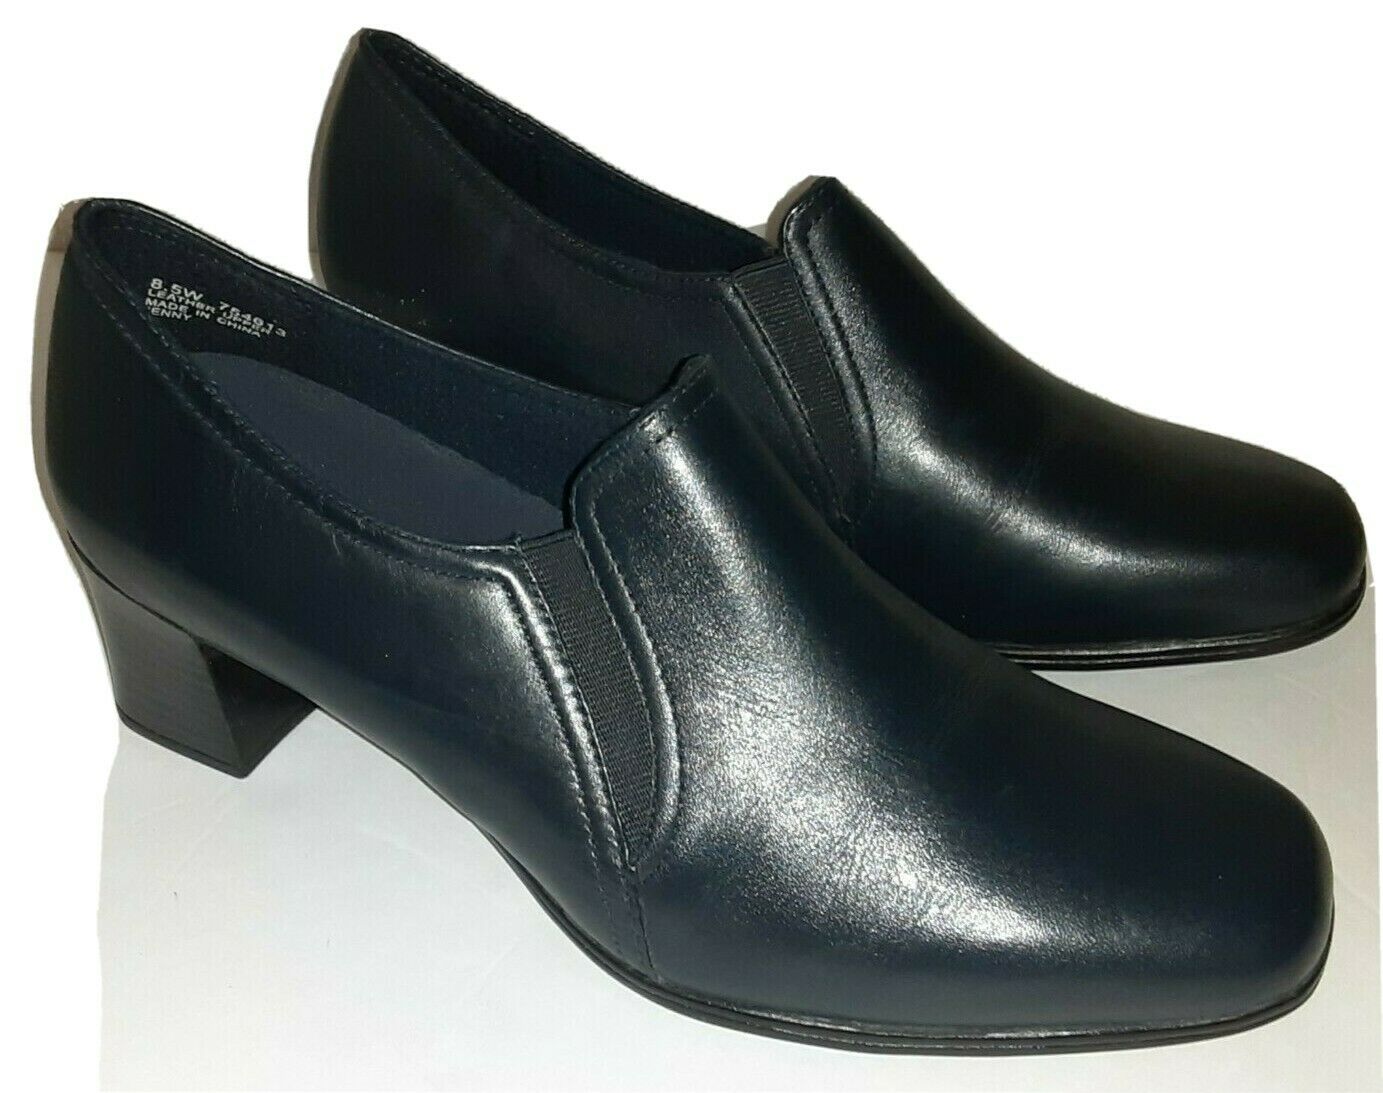 Womens Dress Shoes - Air Supply Plus JENNY - Size 8.5 Wide - Navy Blue Heels